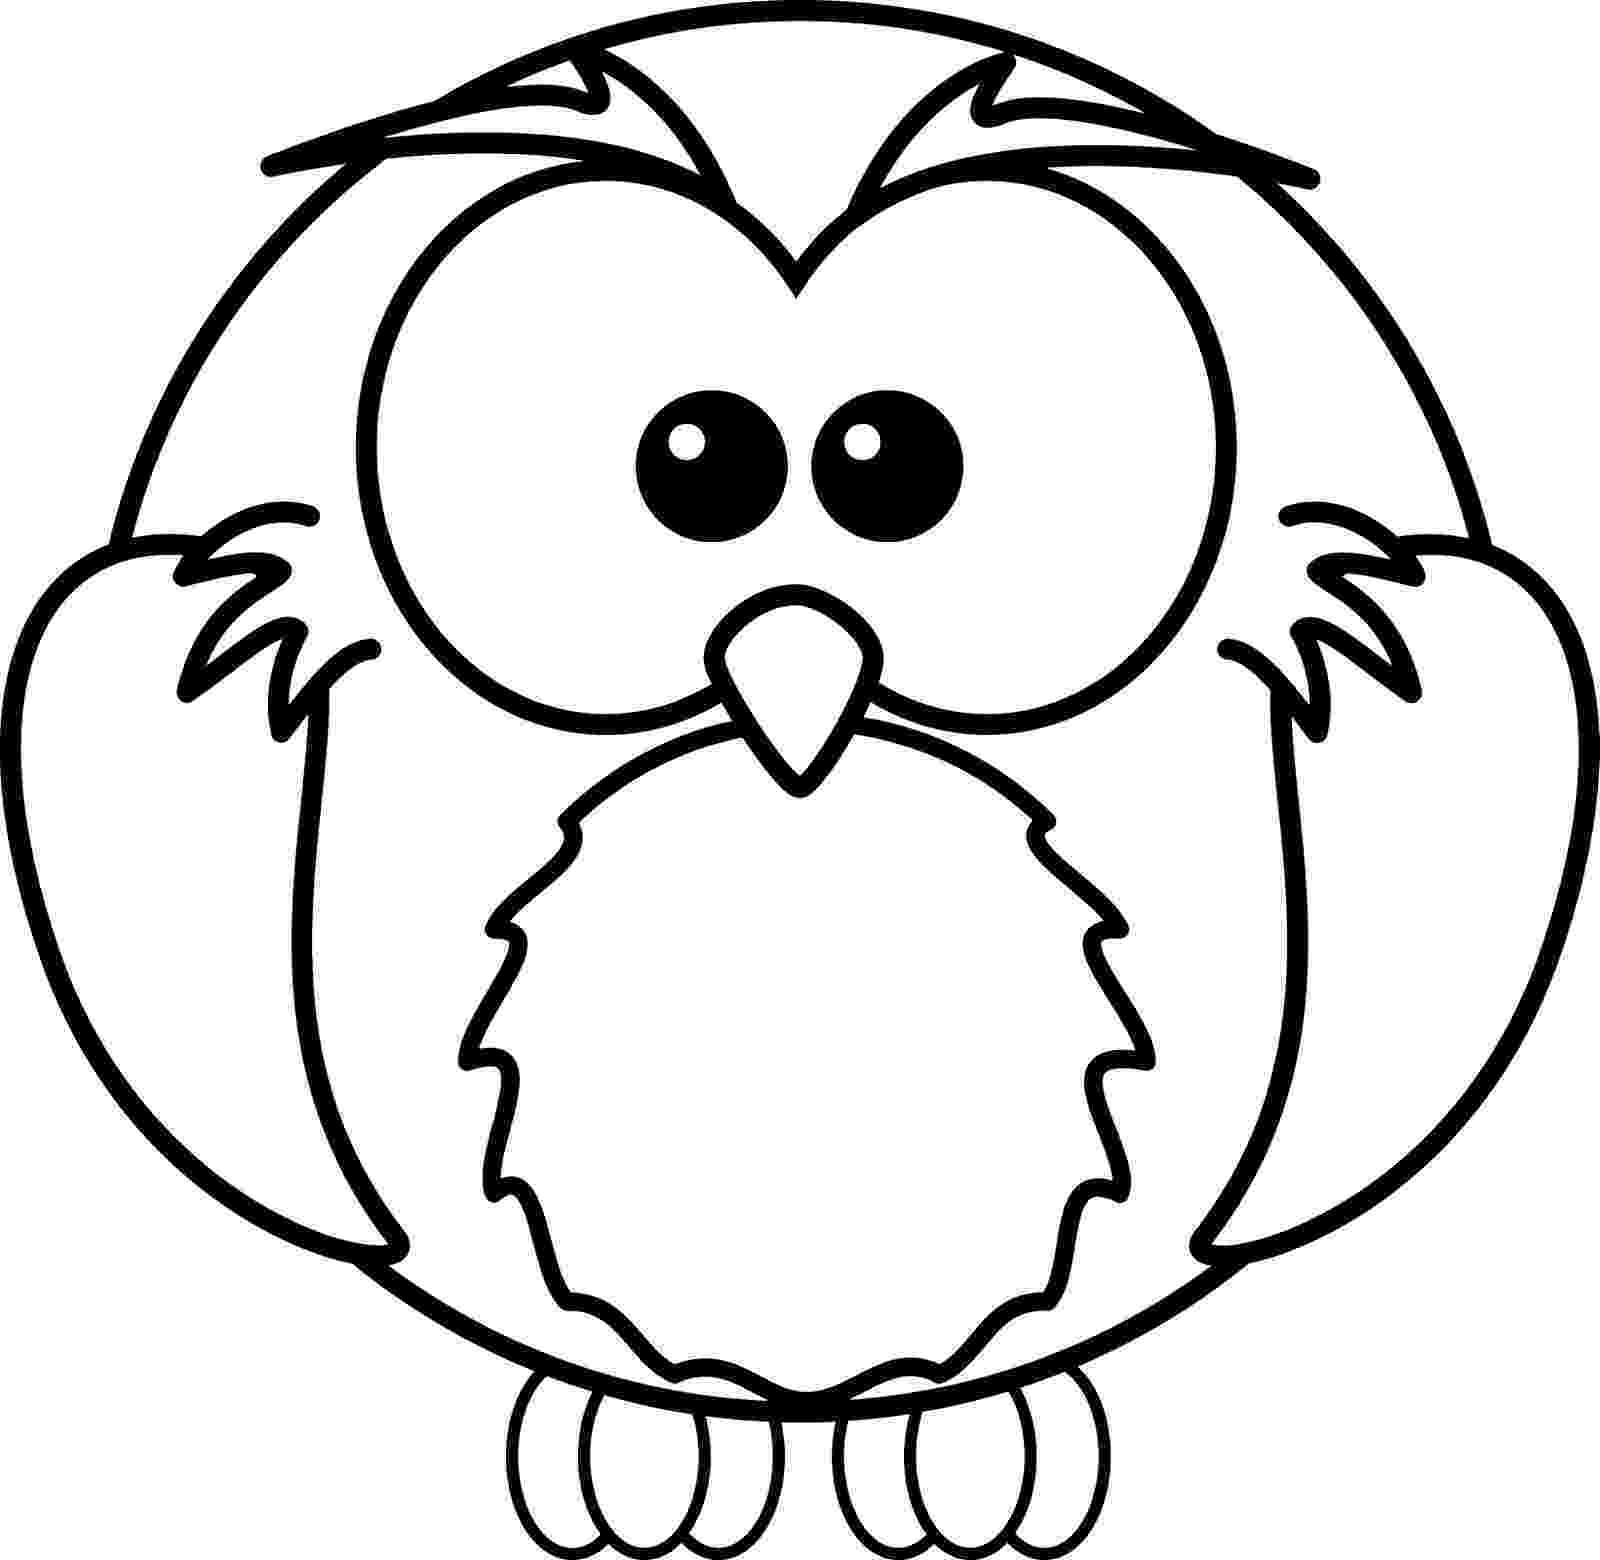 pics of owls to color owl coloring pages for adults free detailed owl coloring to of pics owls color 